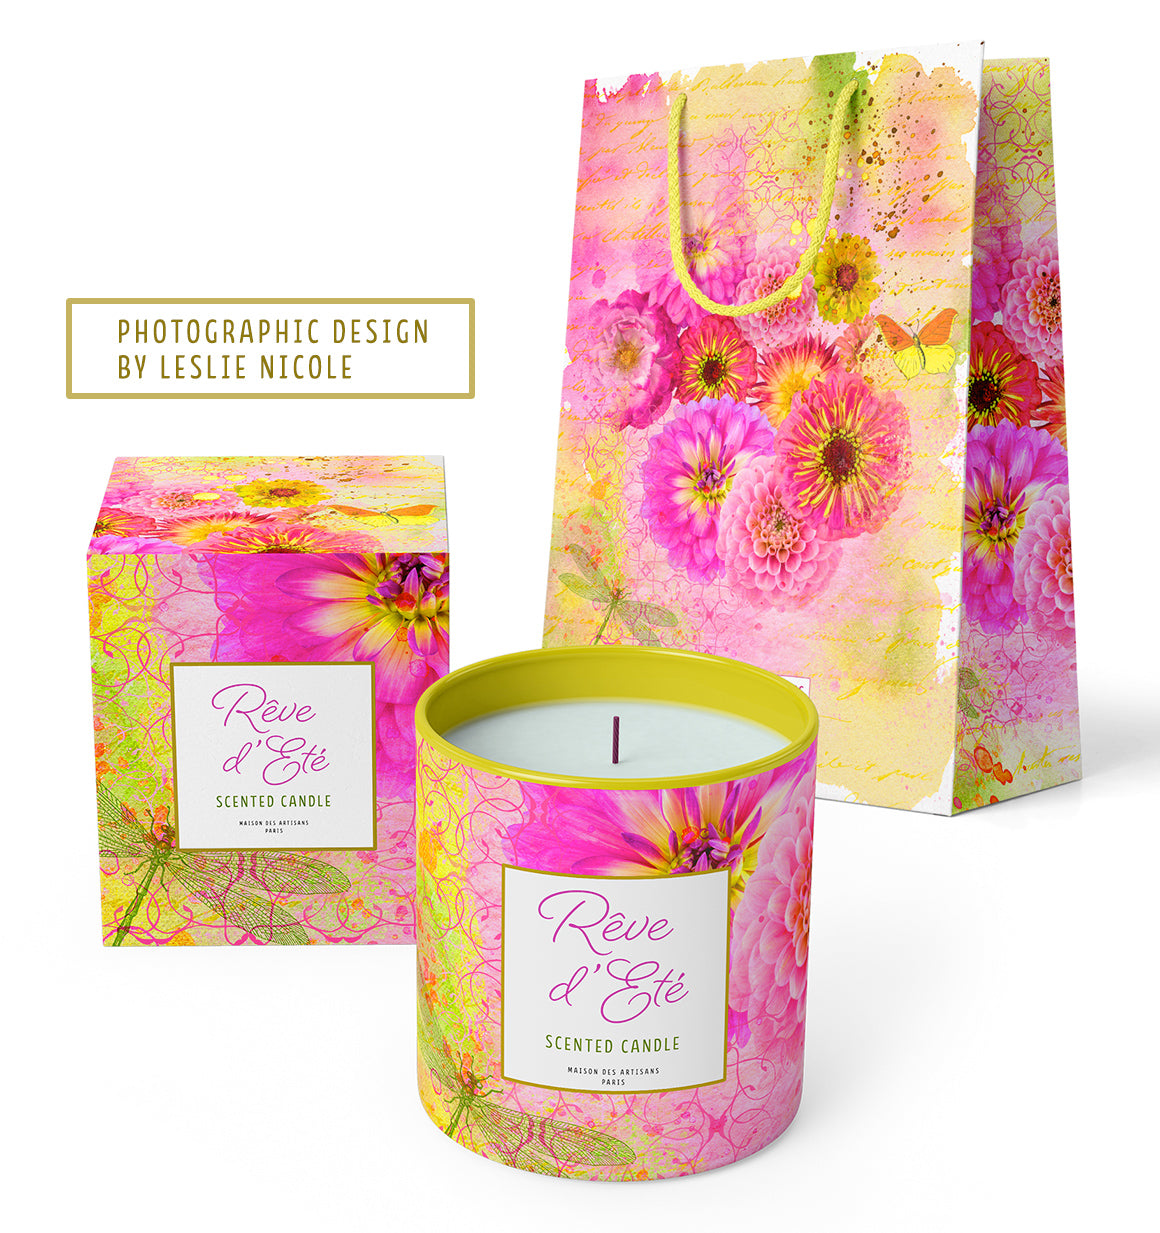 Scented candle and shopping bag design using photographic floral art by Leslie Nicole.